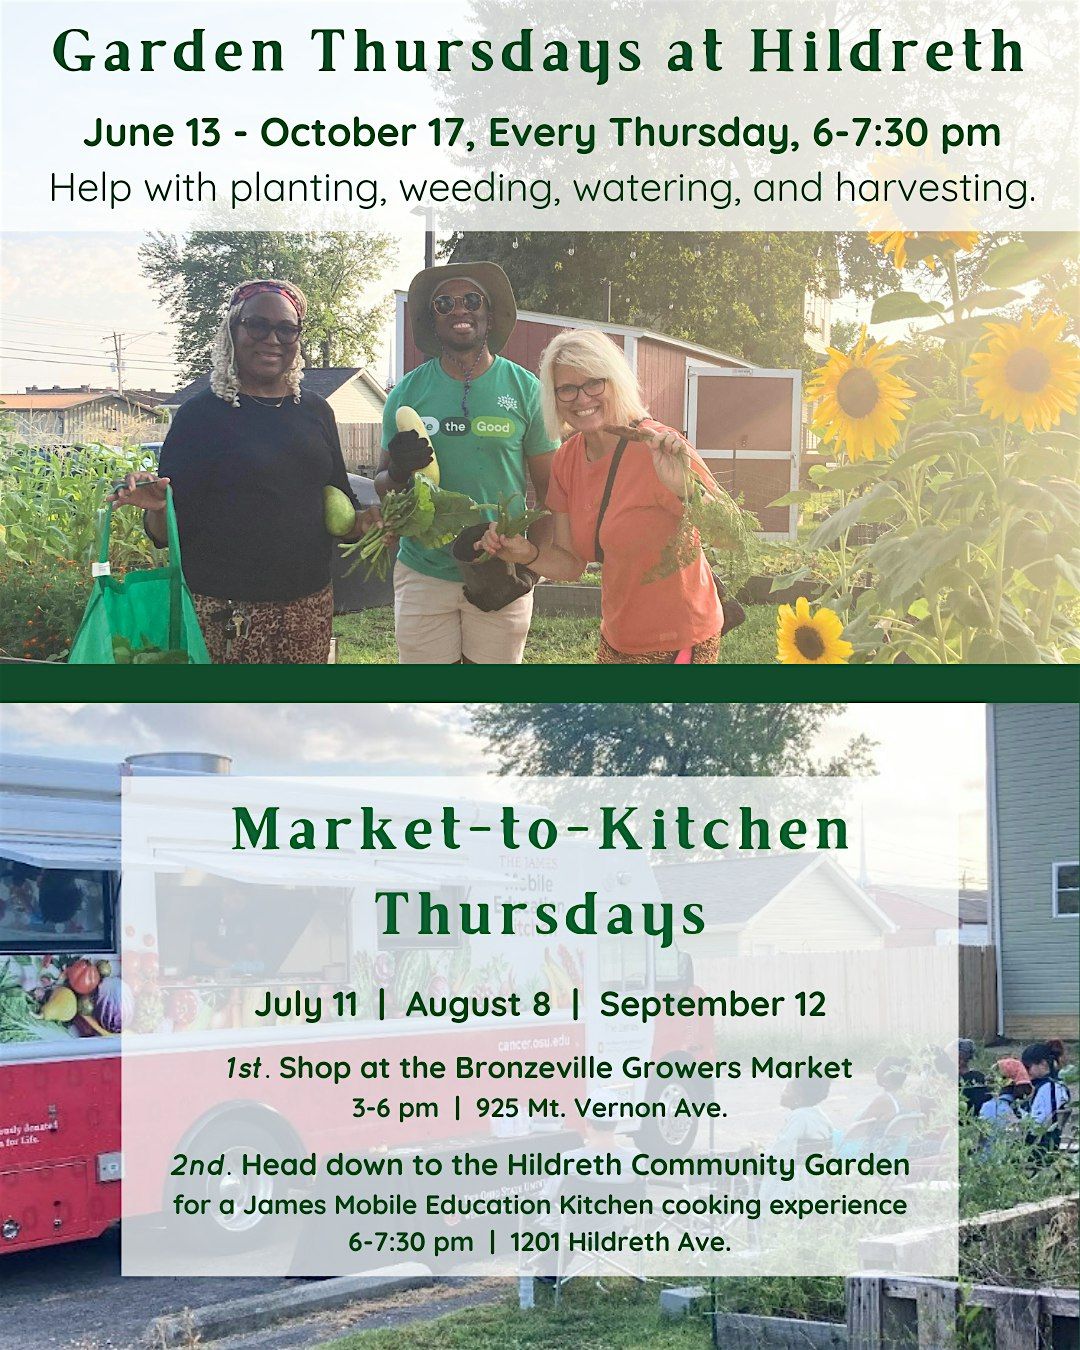 Sept. 12th Market-to-Kitchen Thursday by the Growing and Growth Collective